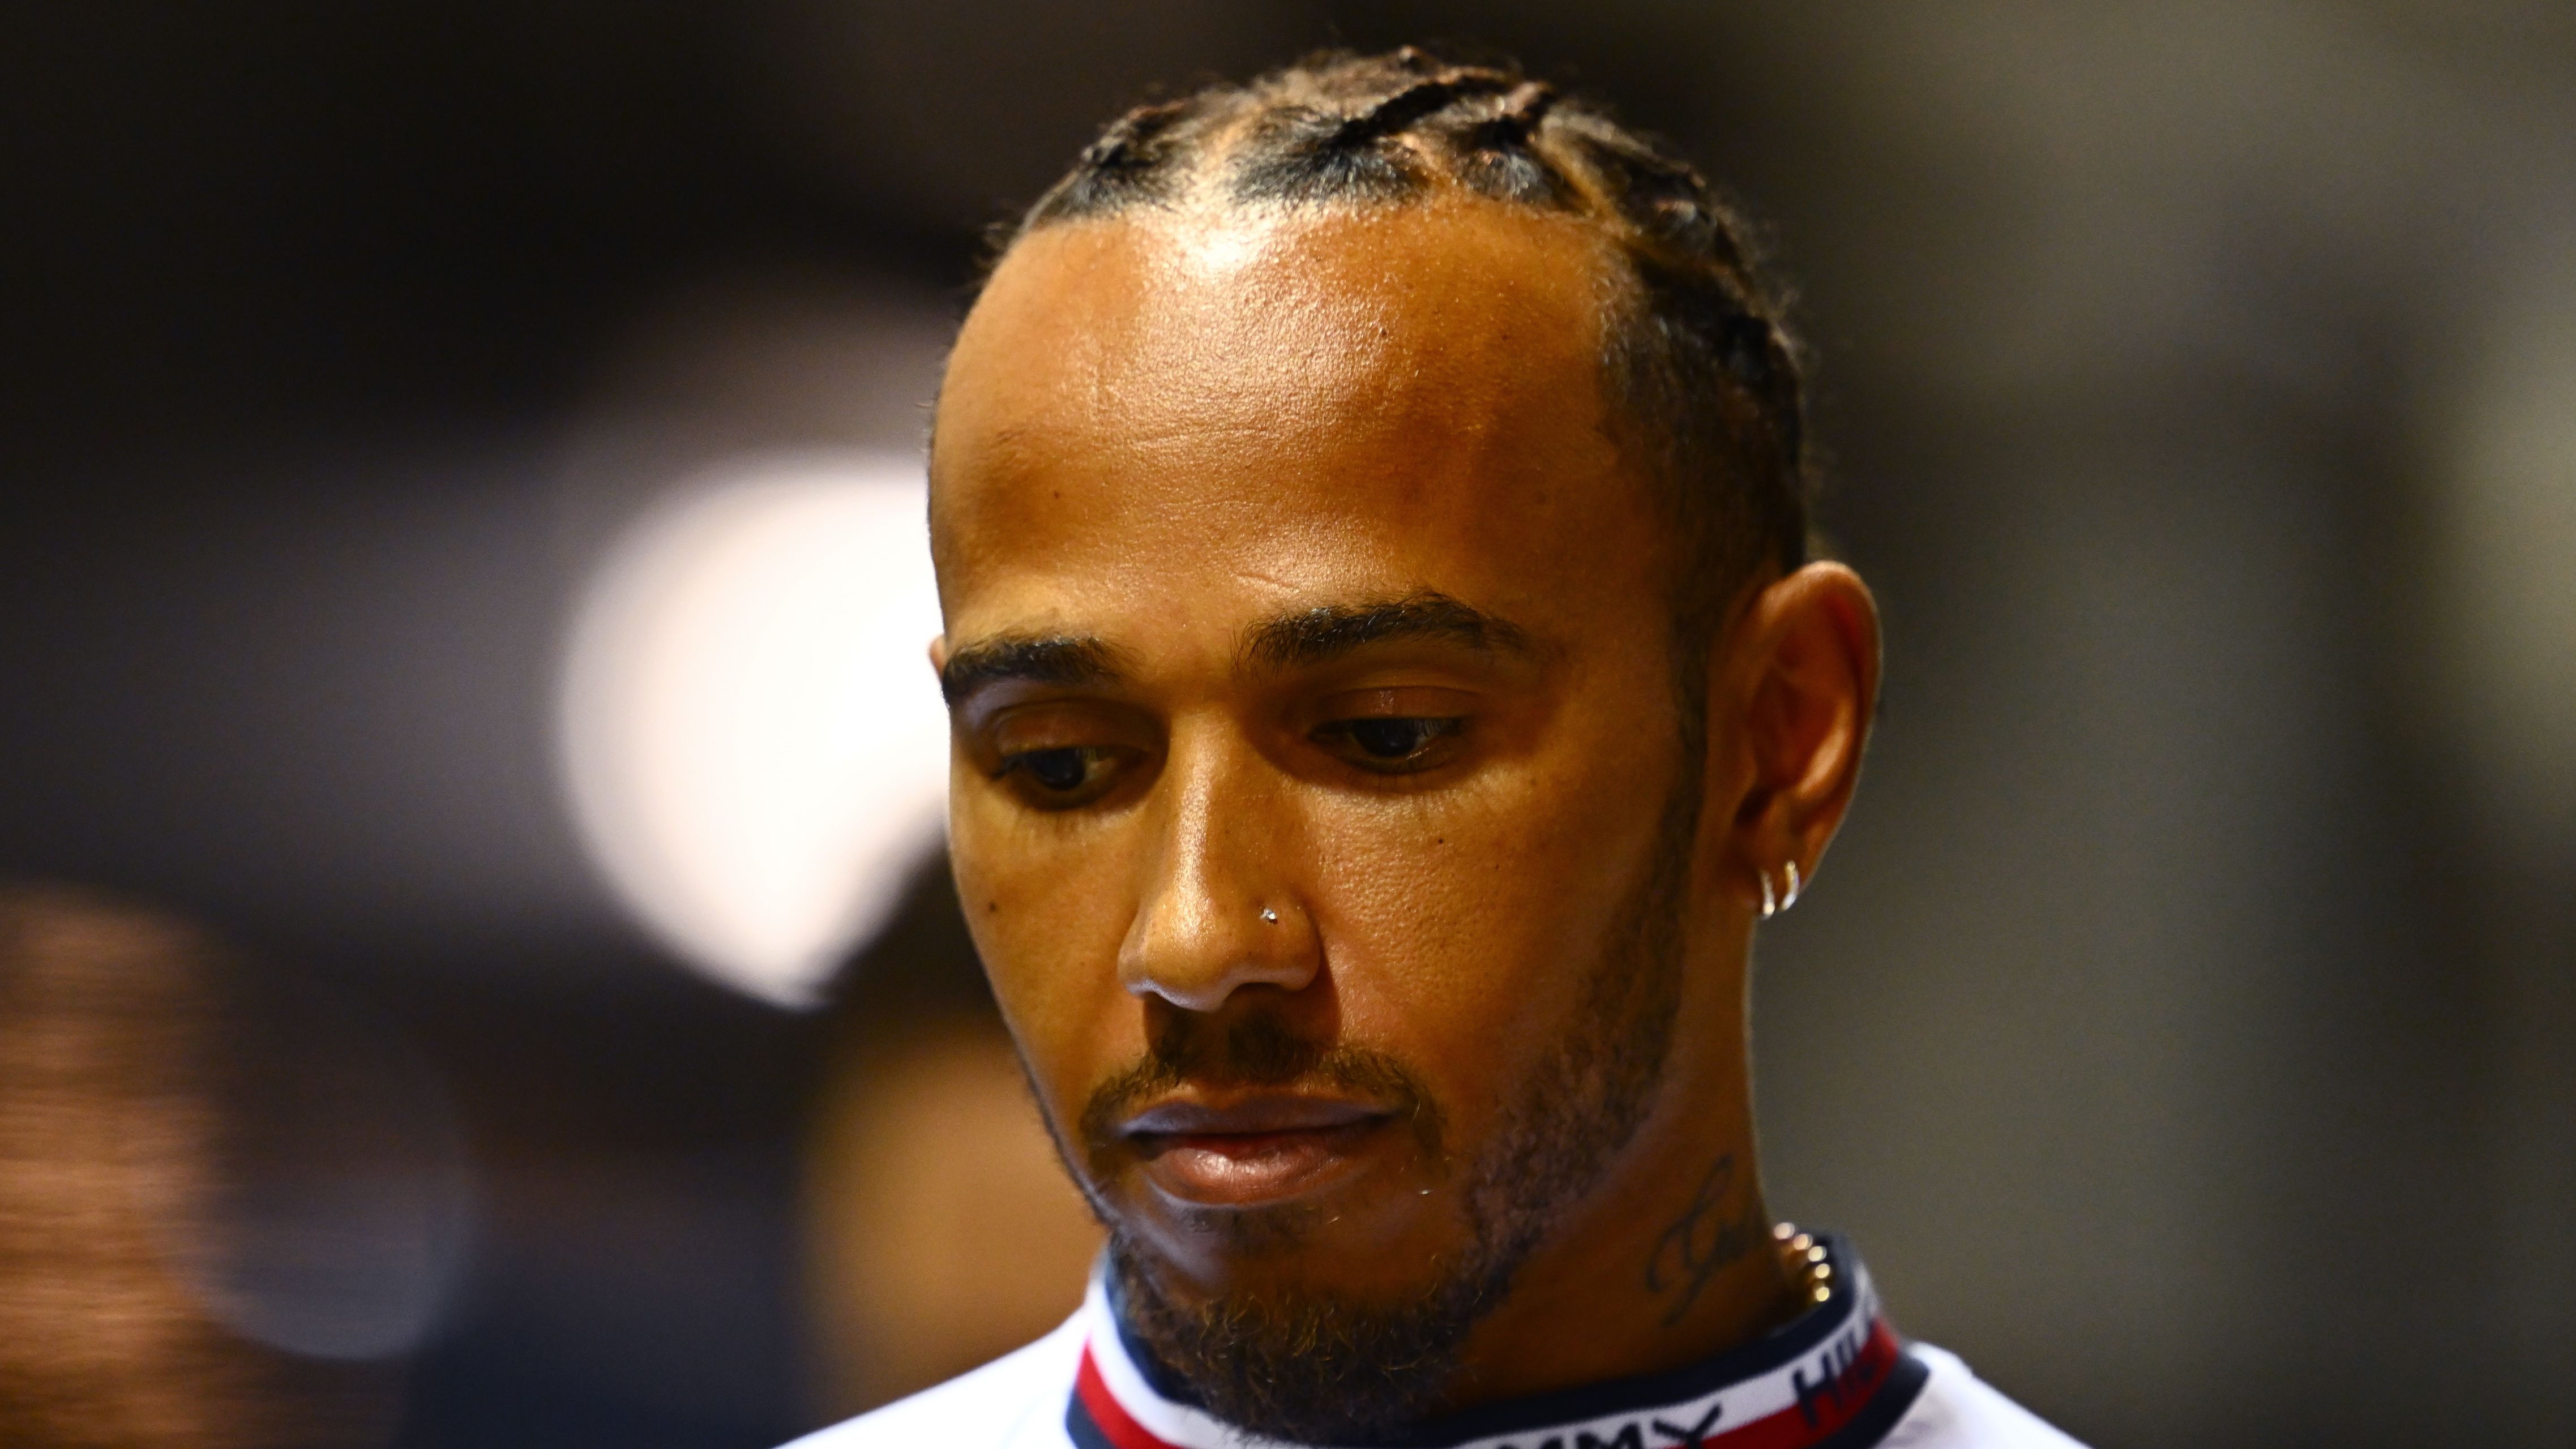 Lewis Hamilton wearing his nose piercing in the paddock at the Singapore Grand Prix. 